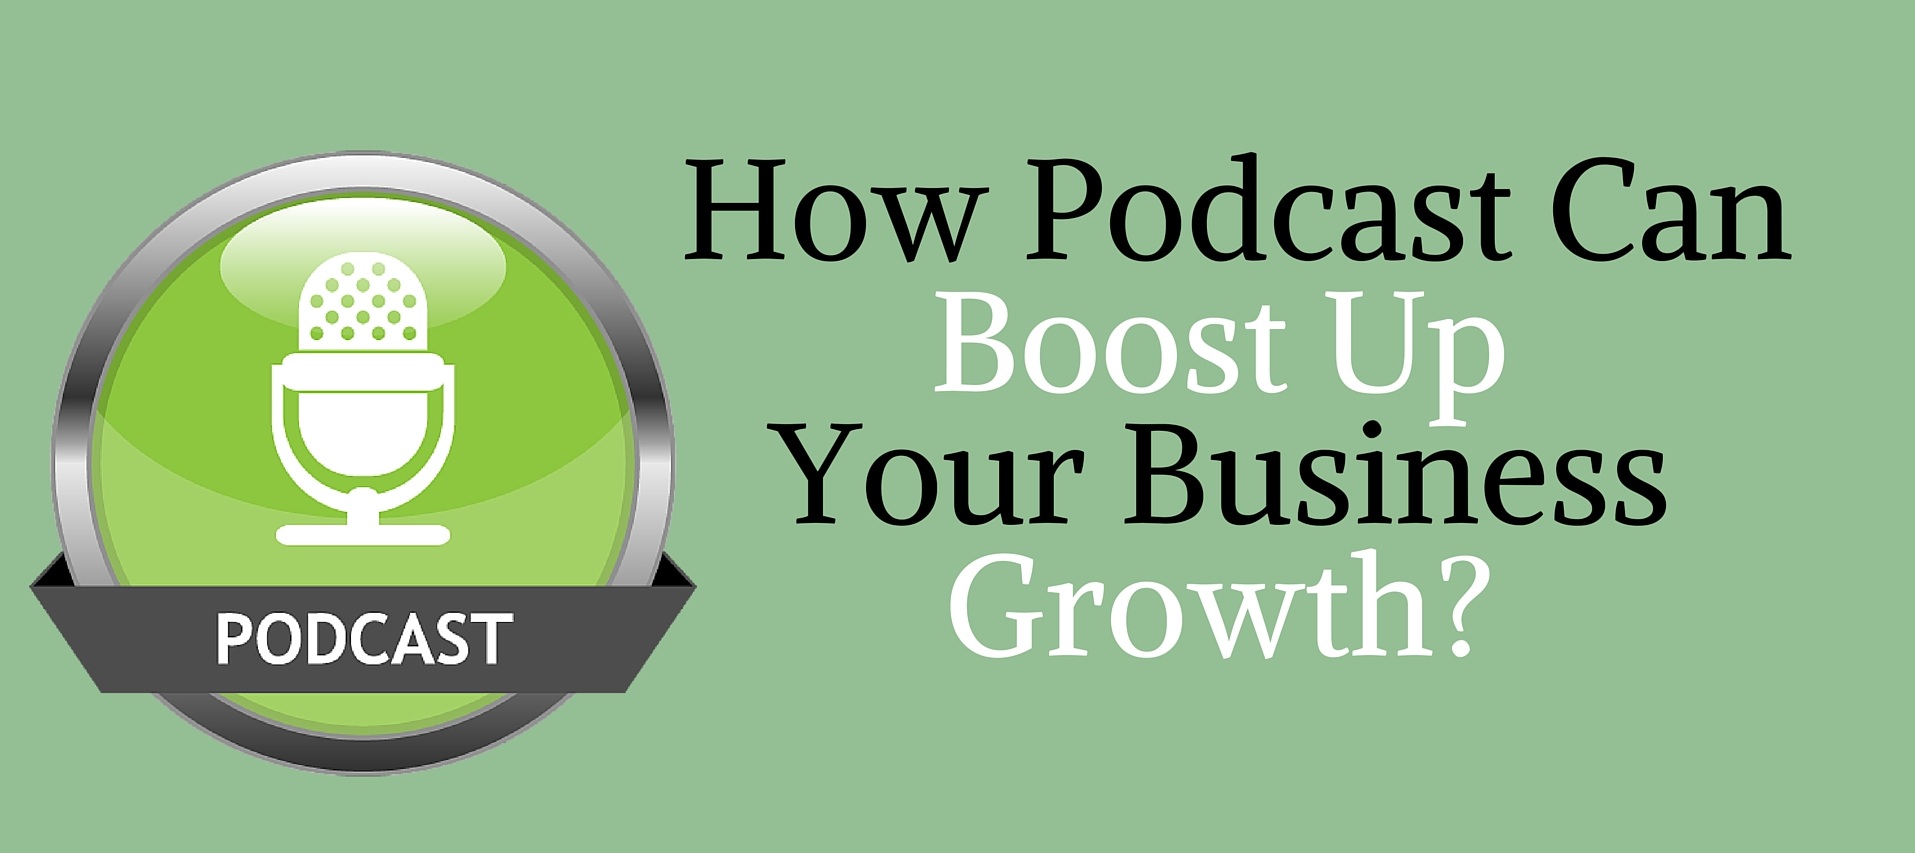 Podcasting: How Podcast Can Boost Up Your Business Growth?